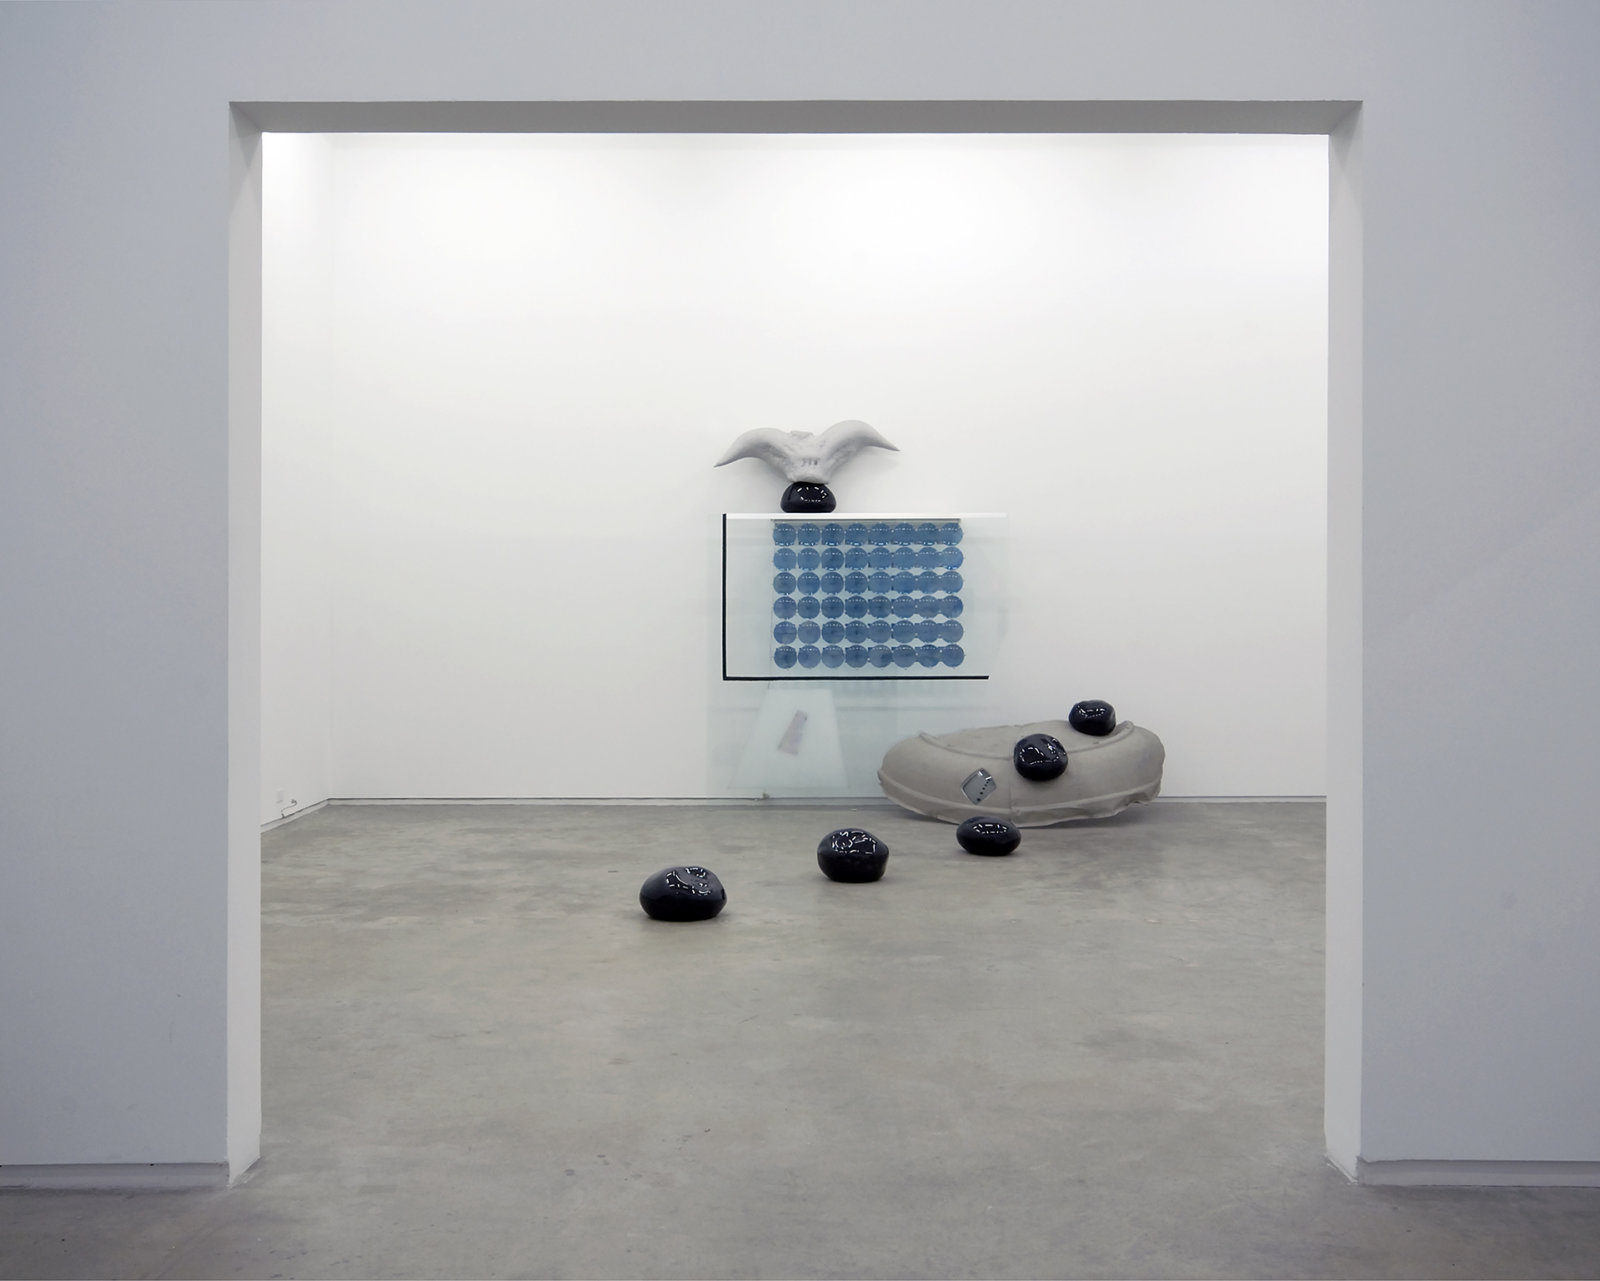 Jerry Pethick, Roof to Heaven Too, 1986–1988, blown glass, glass, rubber tire, TV tube, stones, aluminum, spectrafoil, 48 instamatic prints, 48 blue fresnel lenses, styrofoam, silicone, fluorescent light fixture, 169 x 111 x 75 in. (429 x 282 x 191 cm)